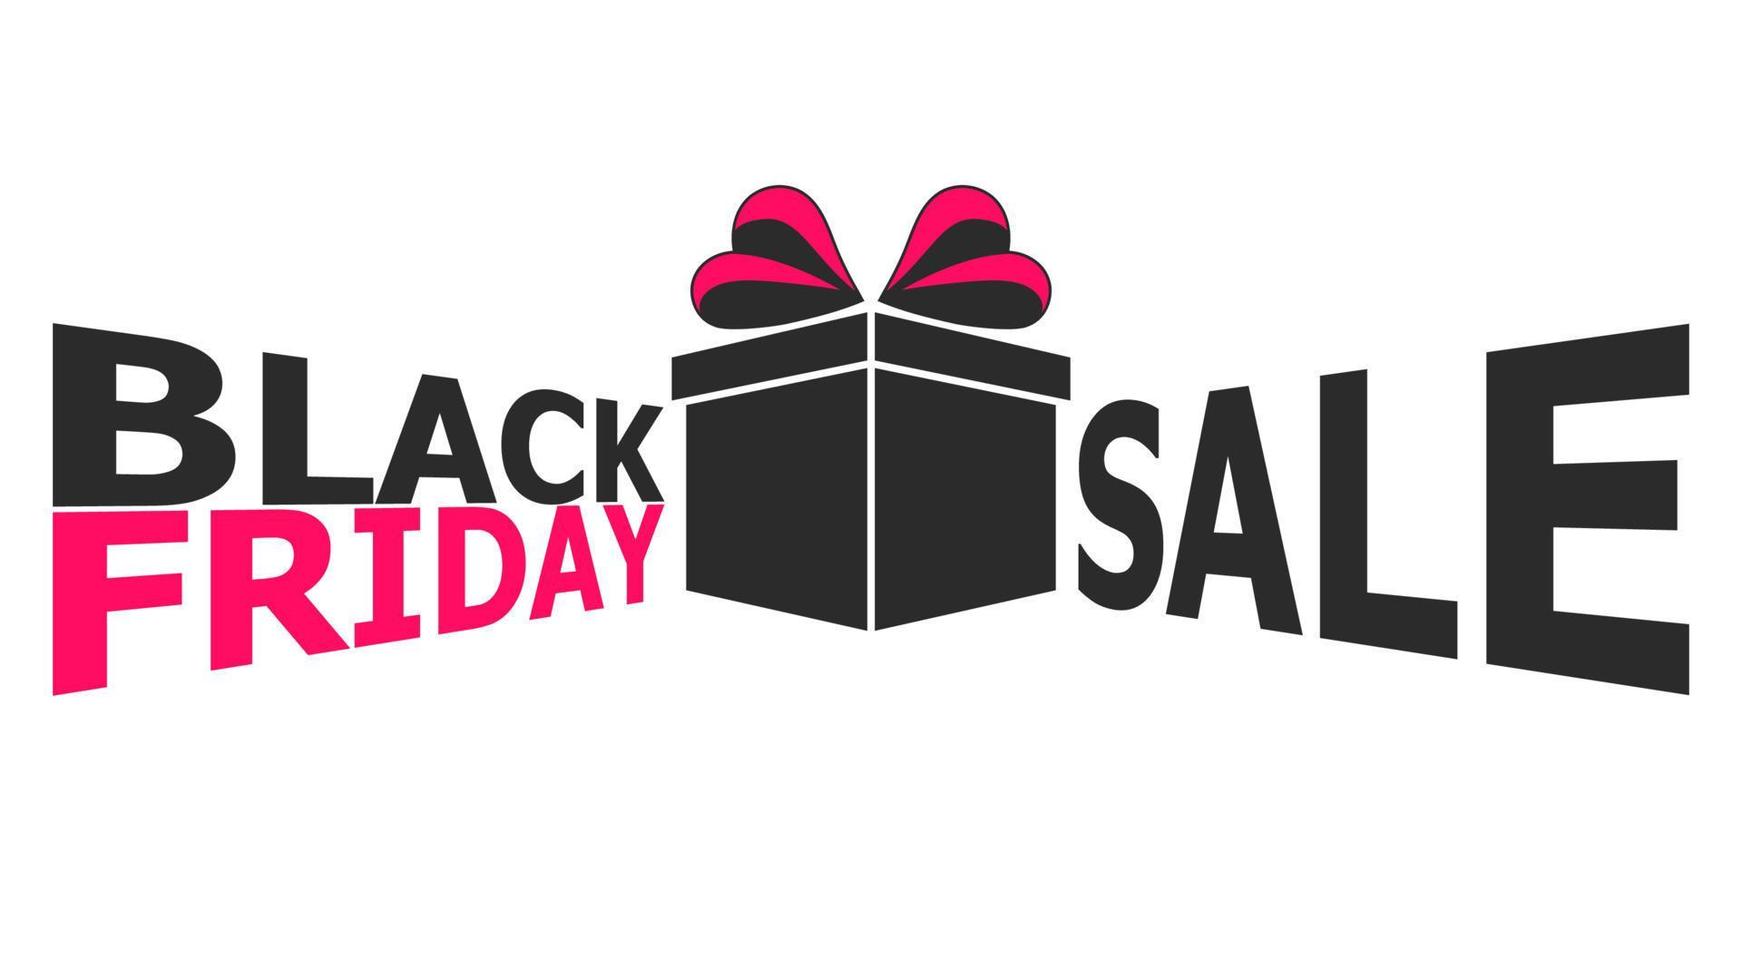 The inscription Black Friday in perspective and a gift box with a bow vector